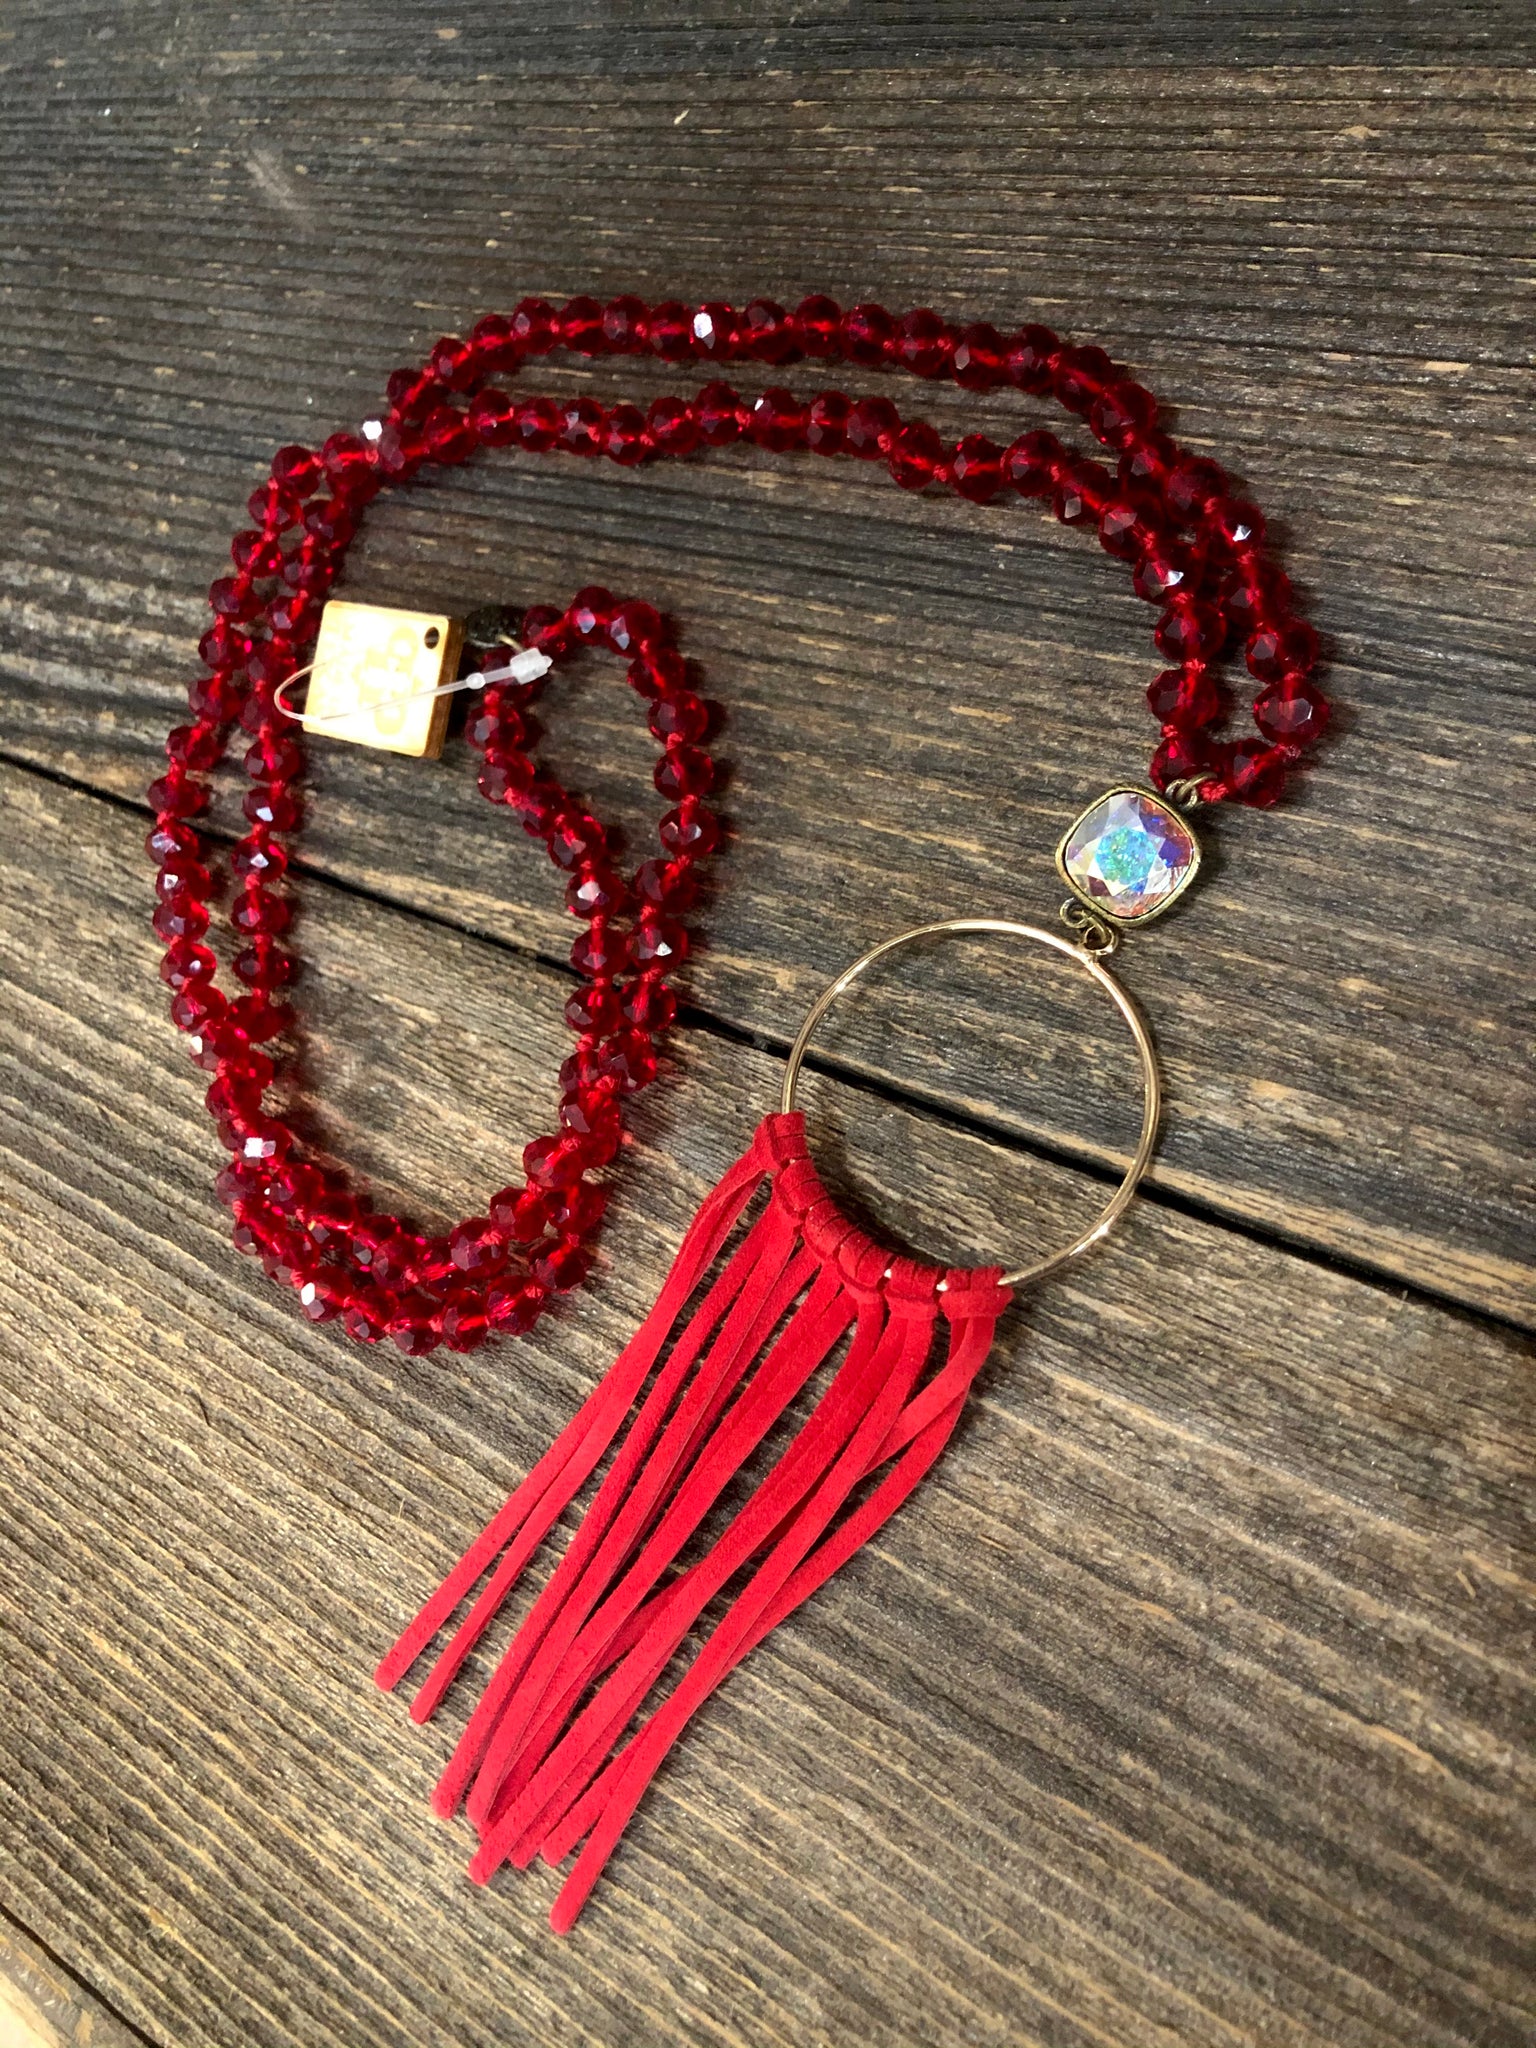 Knotted Beaded Necklace With Red Fringe